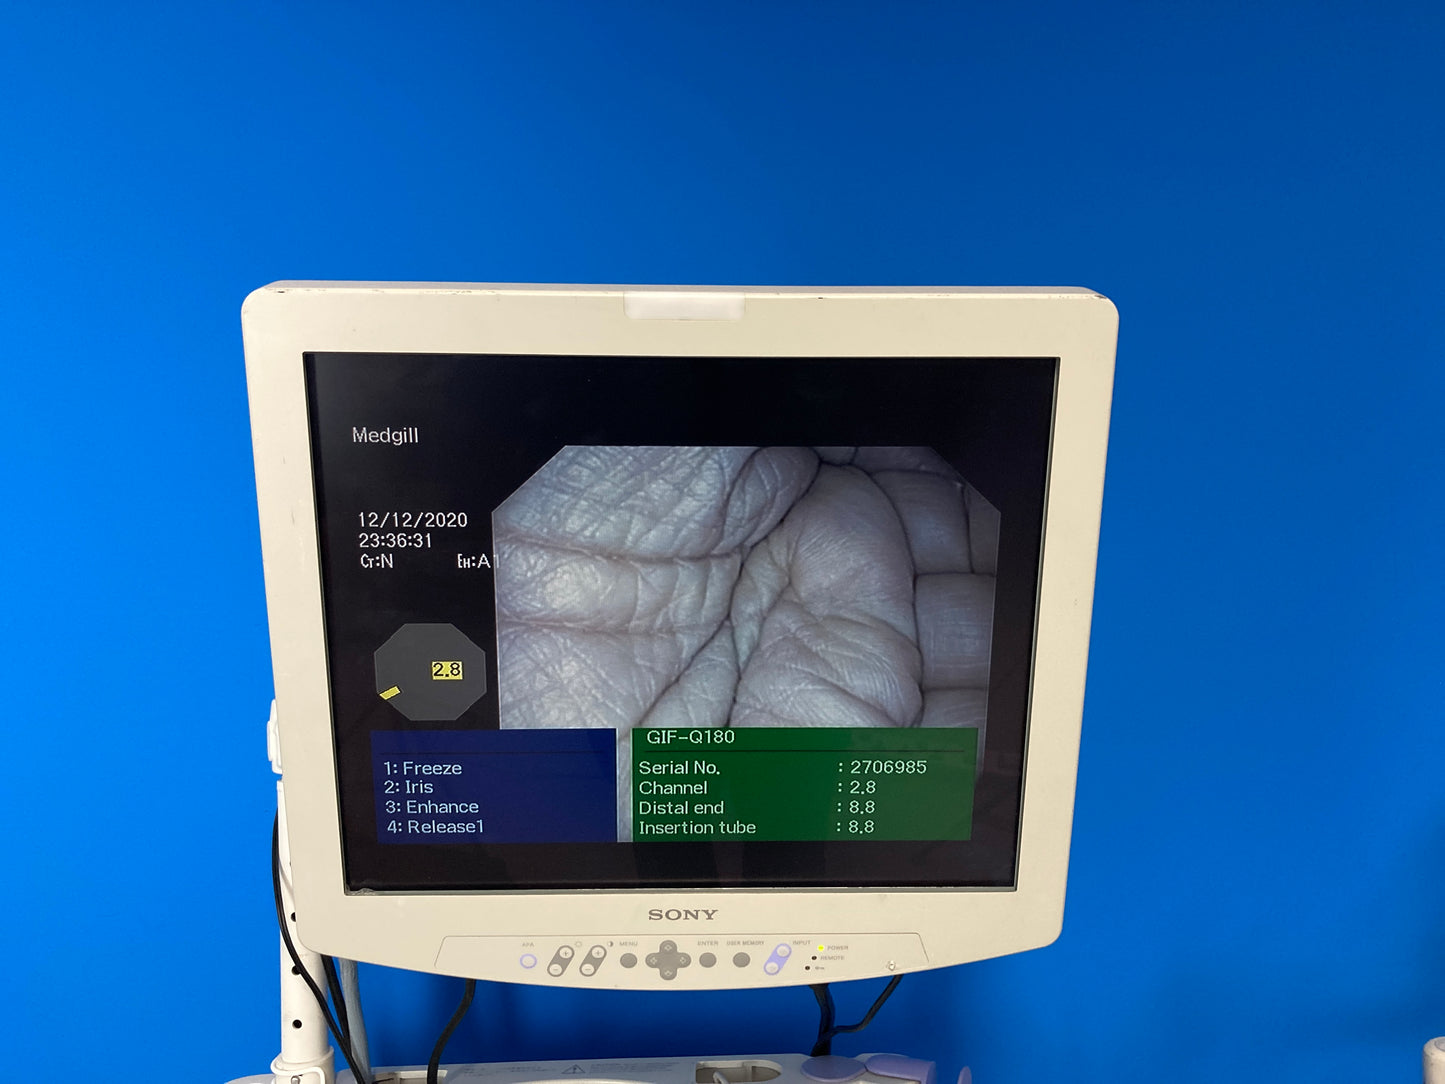 Sony LCD Monitor Widest field of view available in a Gastroscope , Full screen display size give superior image quality